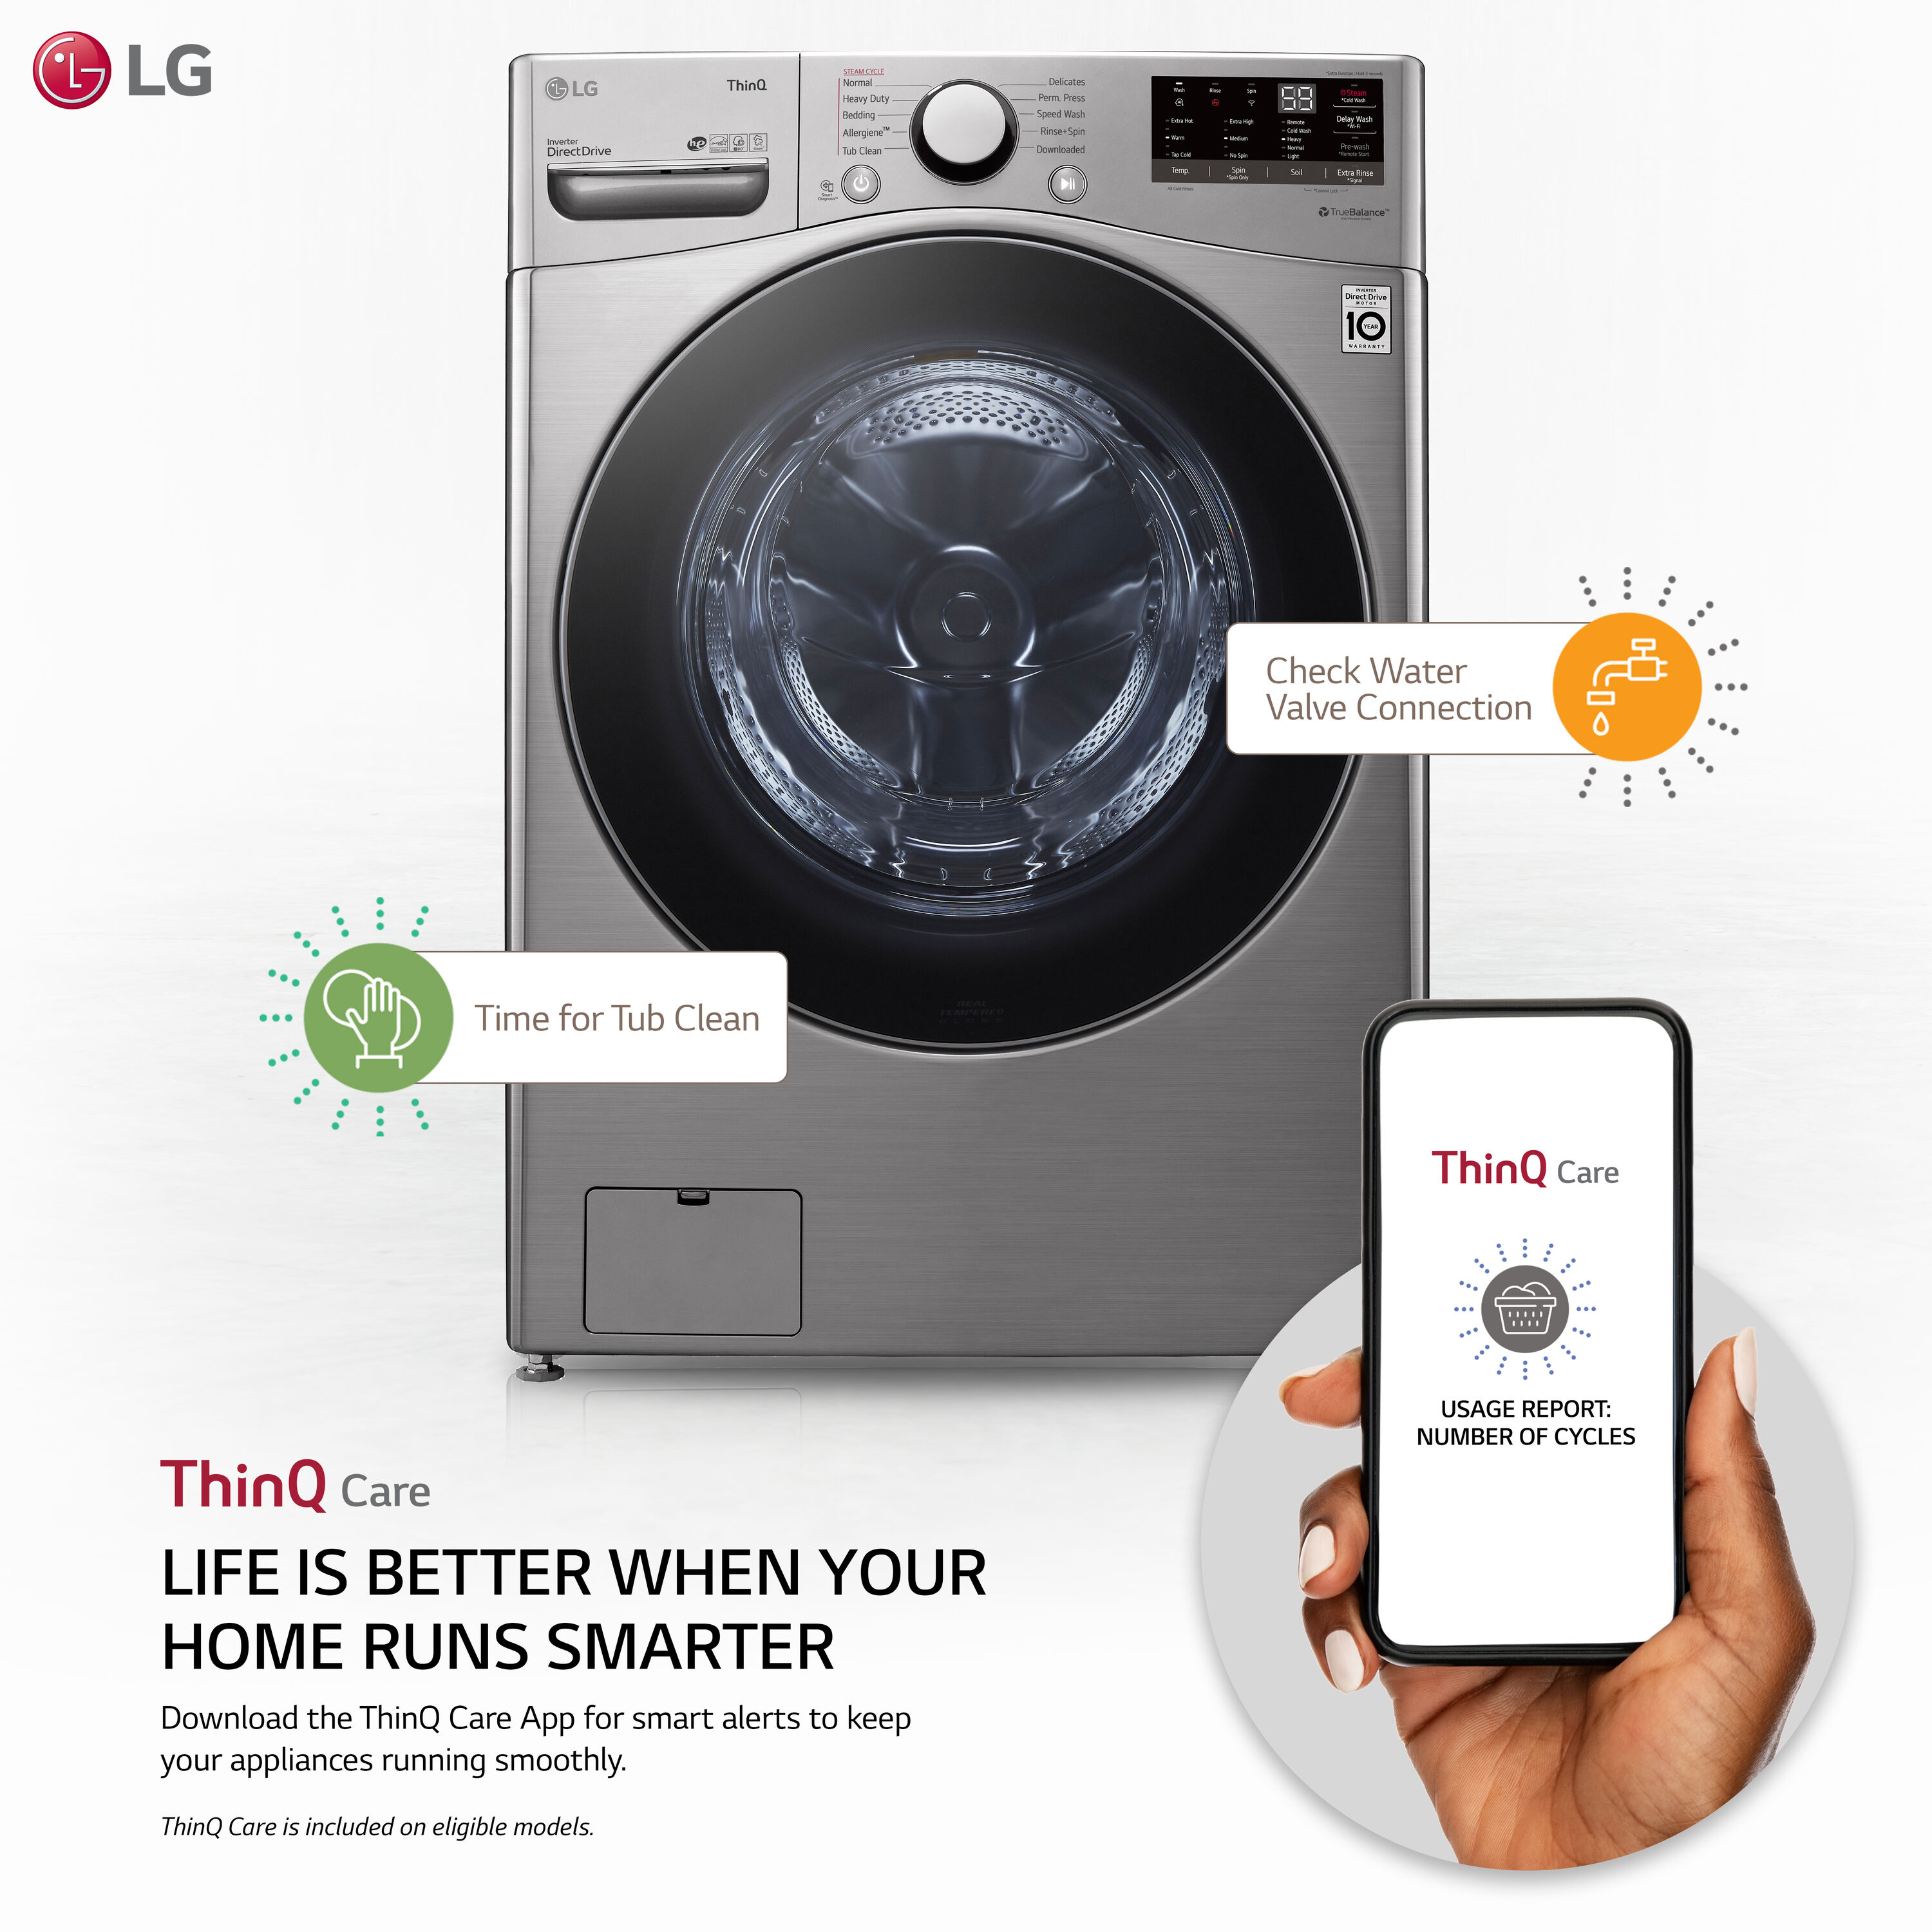 LG 4.5 cu. ft. Front Load Washer - A4L Pomona